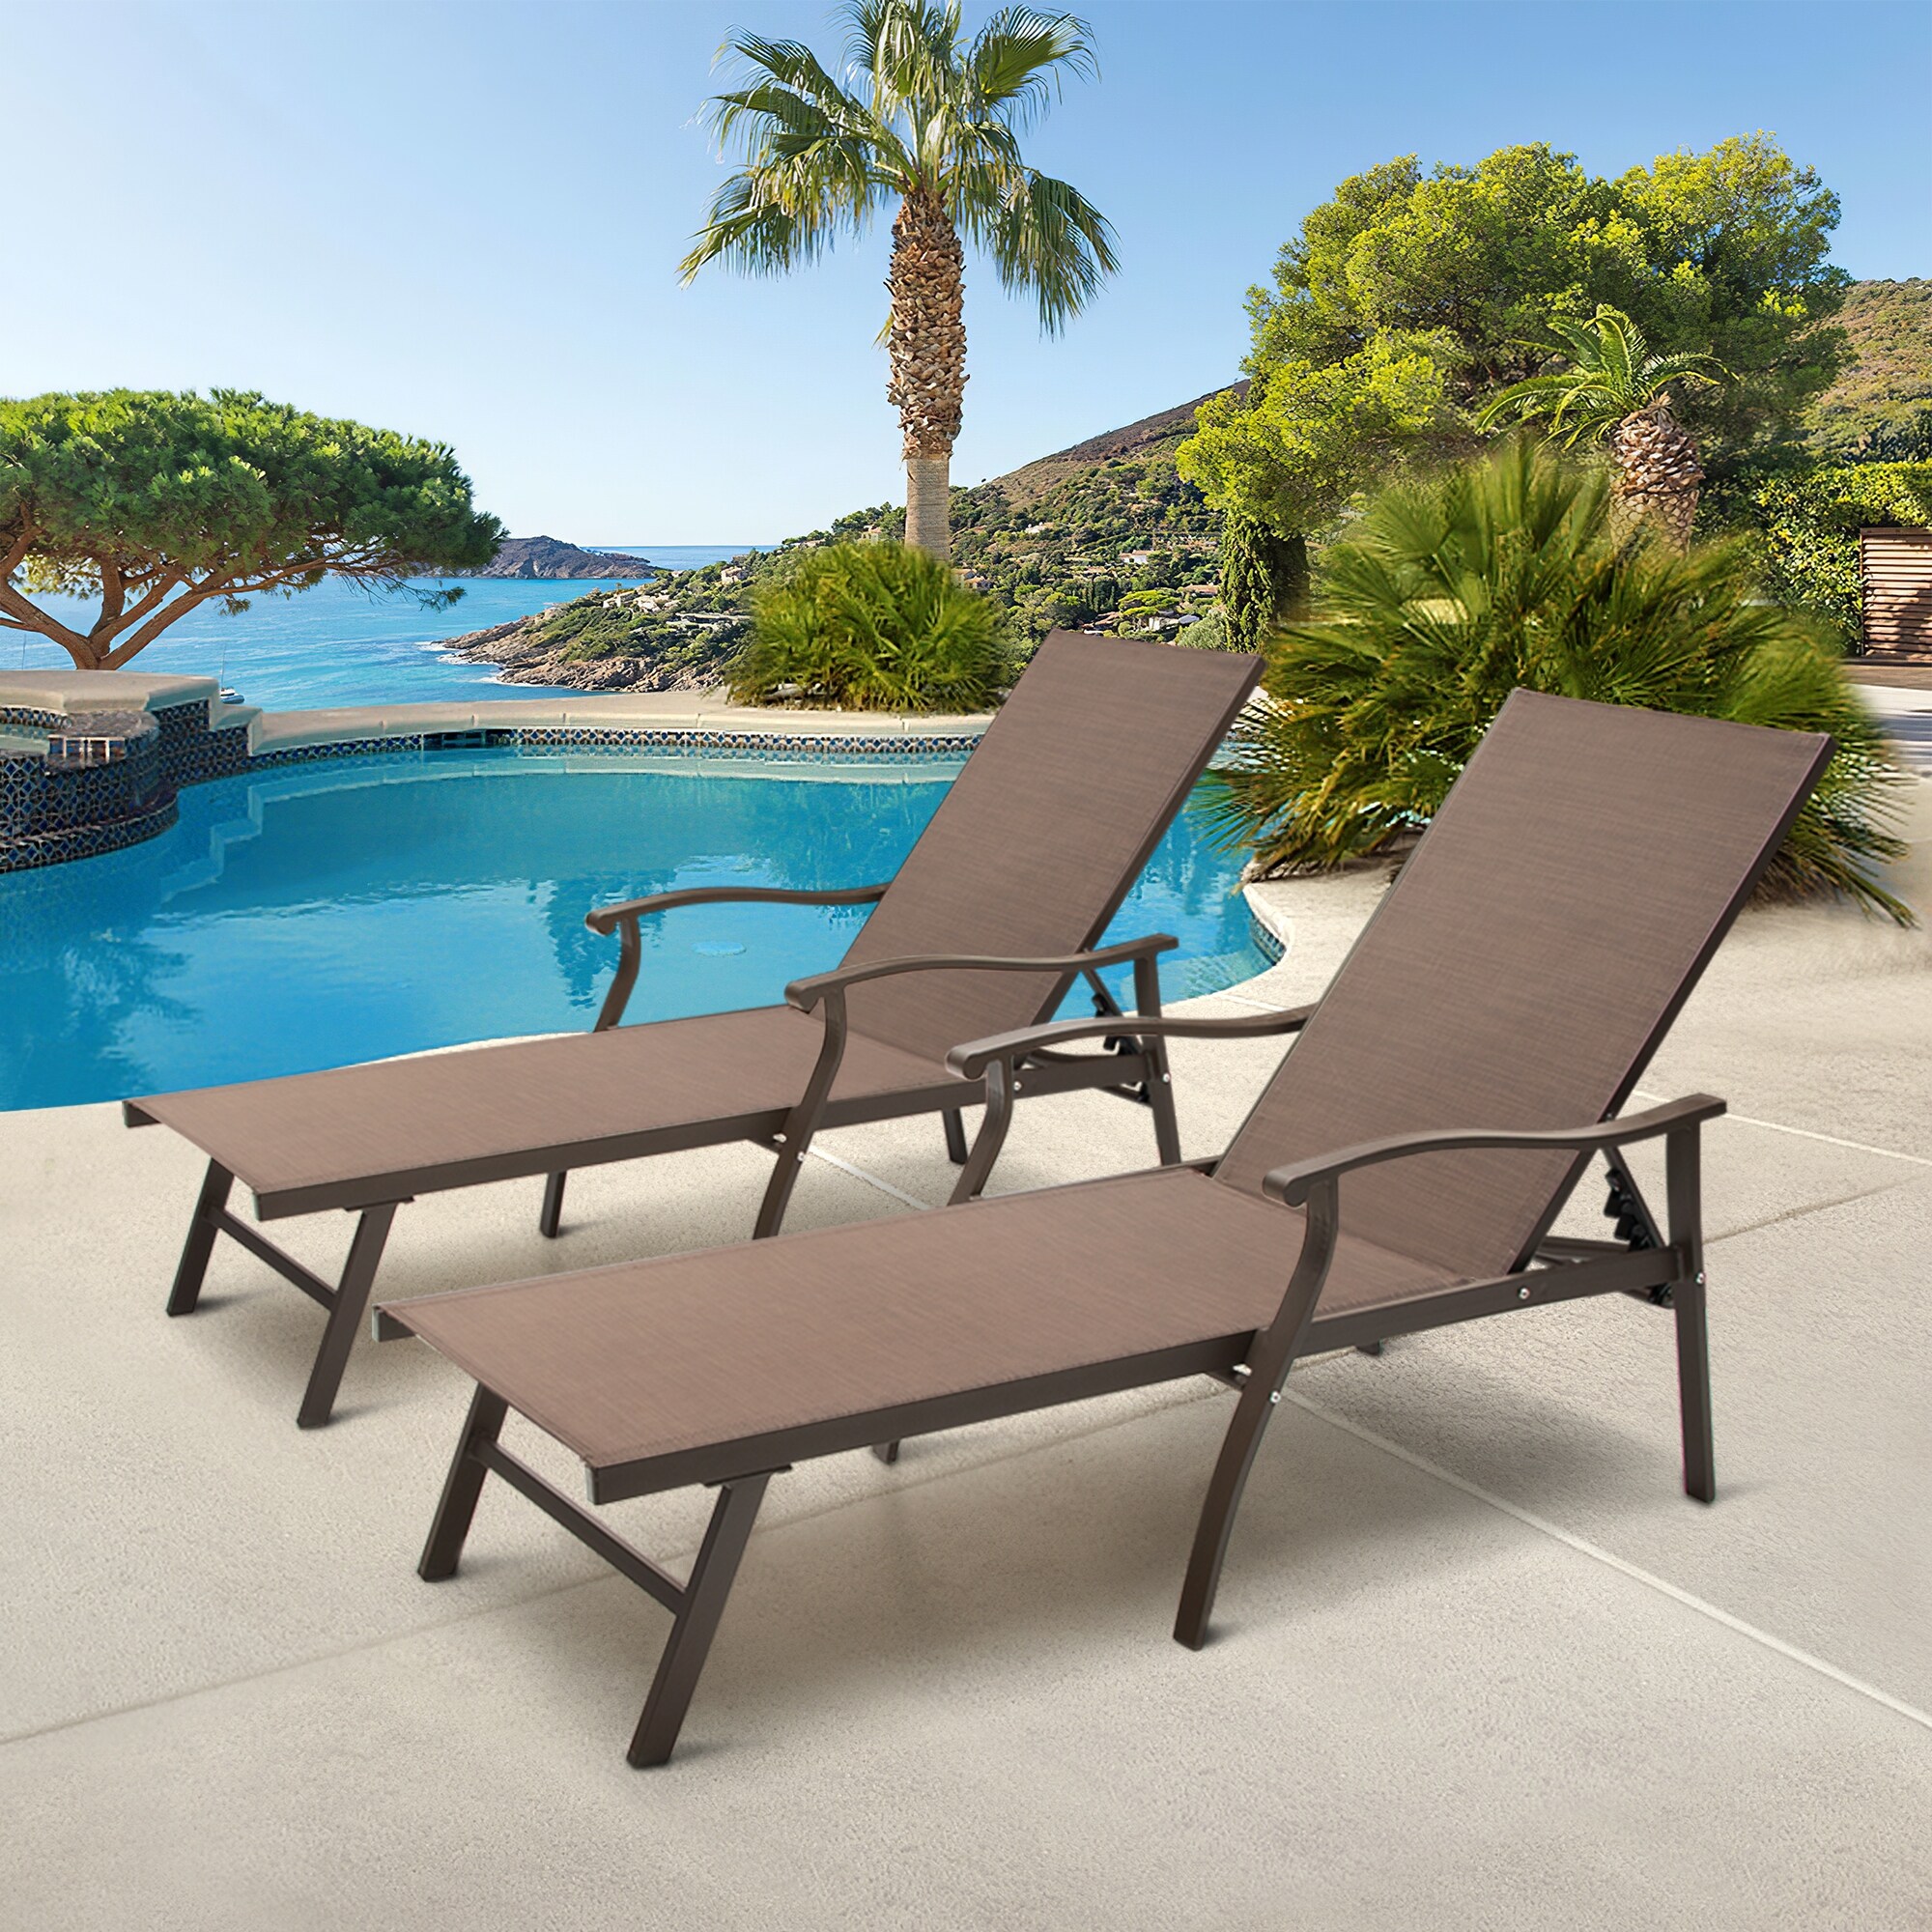 Vredhom Outdoor Aluminum Adjustable Chaise Lounge (set Of 2) 76.18" L X 21.06" W X 13.58" H